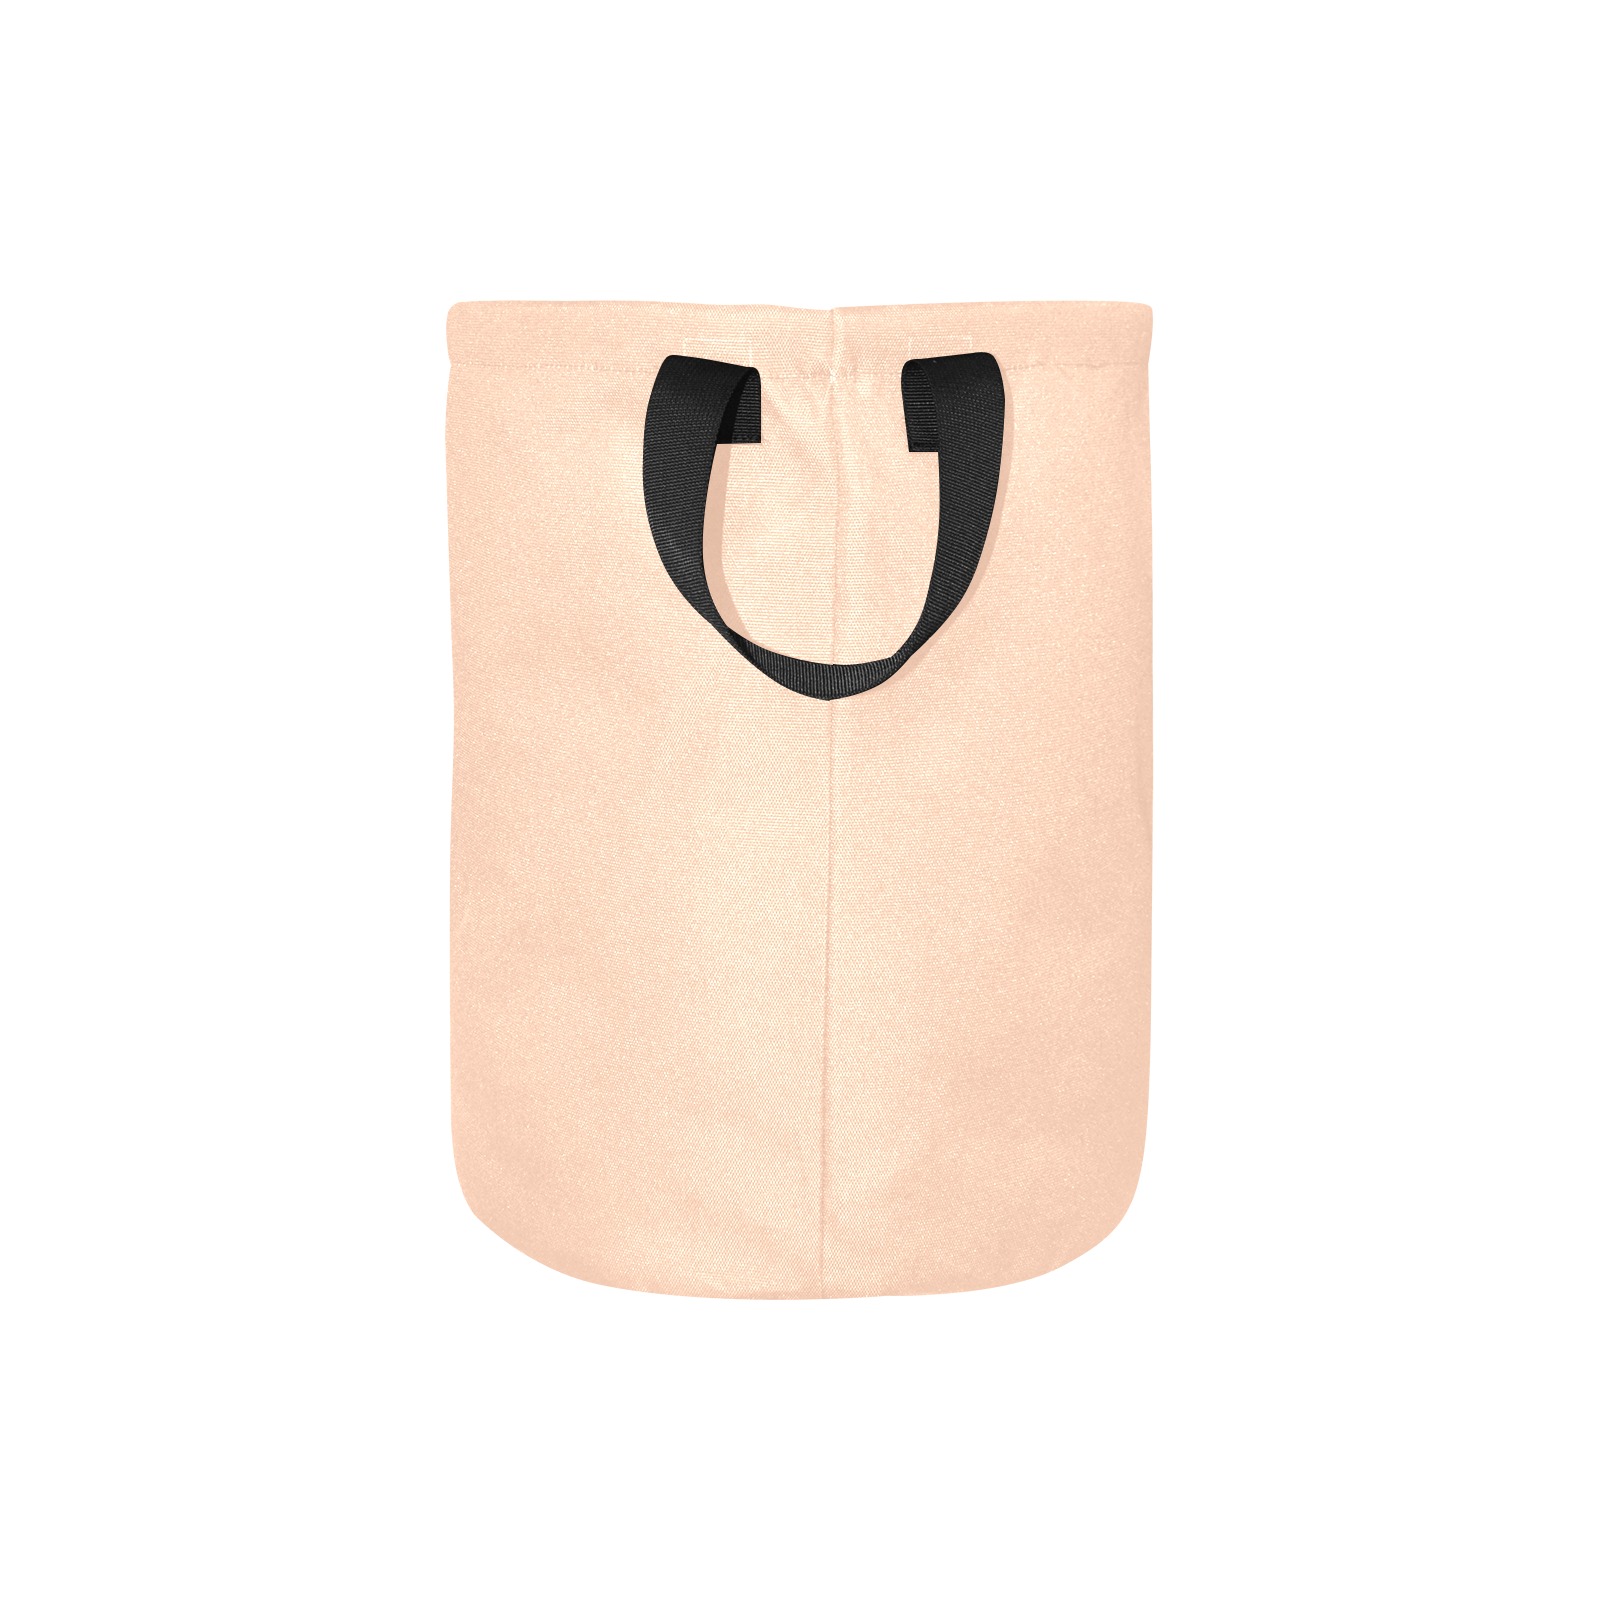 color apricot Laundry Bag (Small)